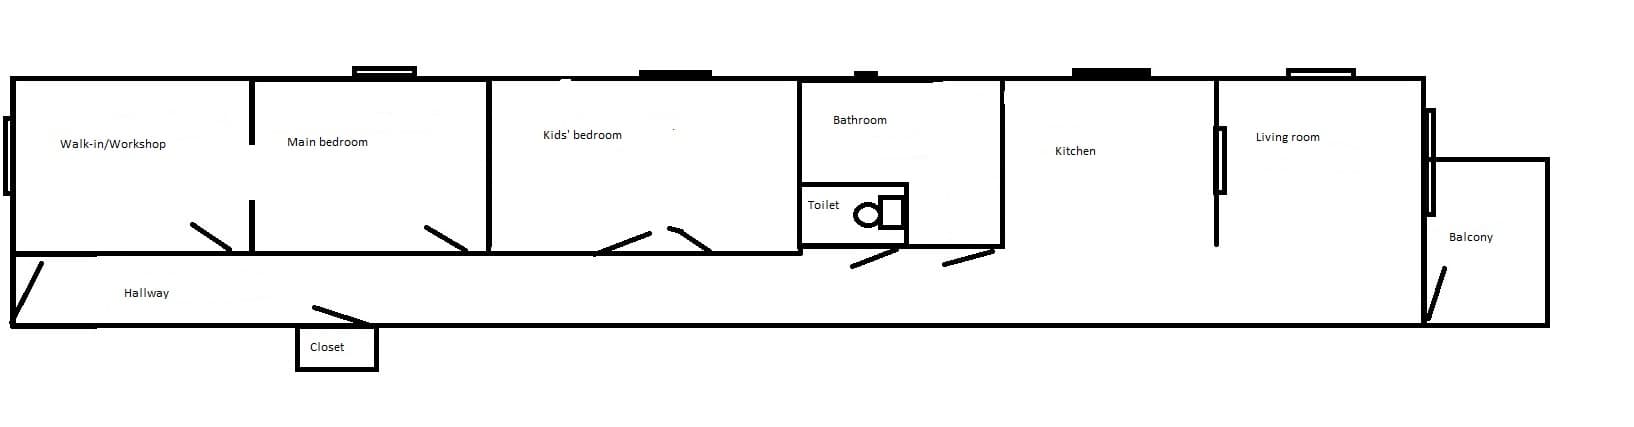 Plan or our condo after renovations